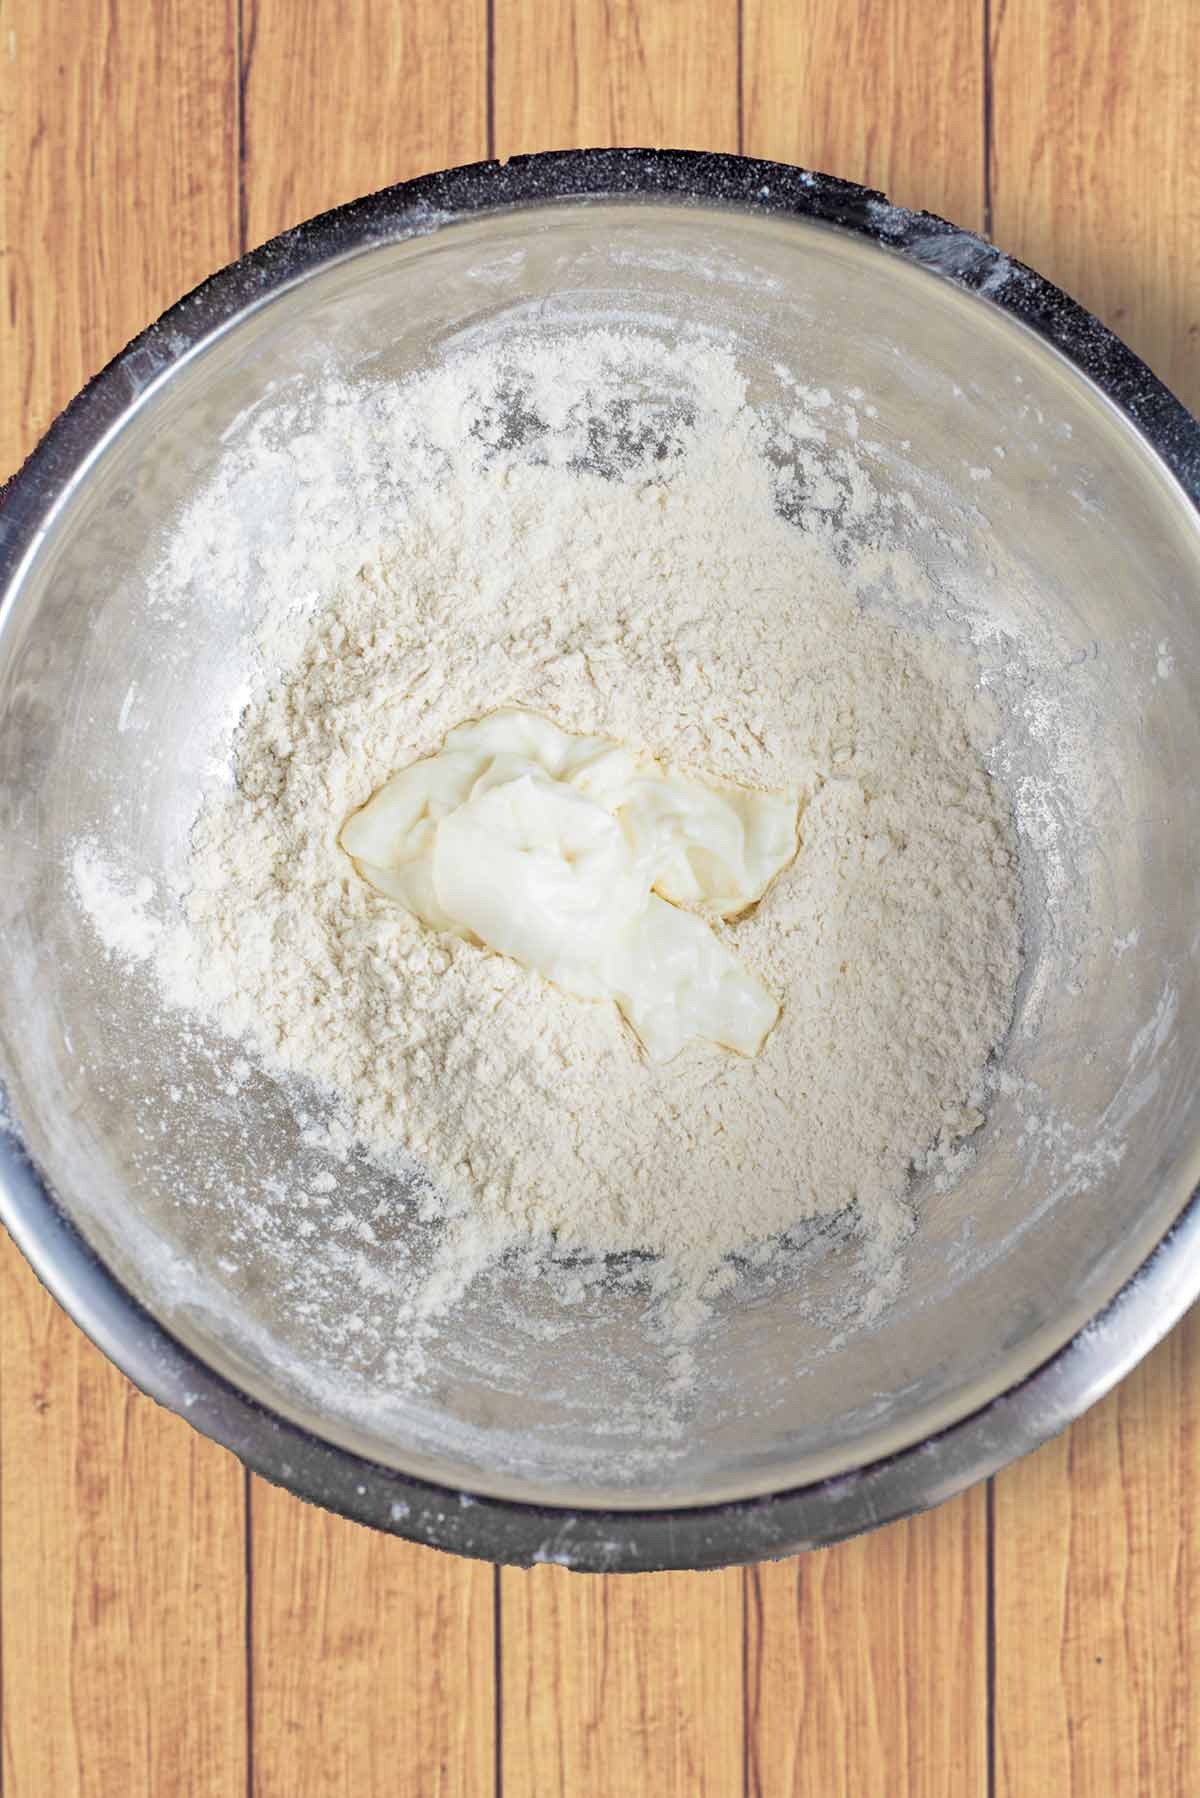 Flour and yogurt in a mixing bowl.